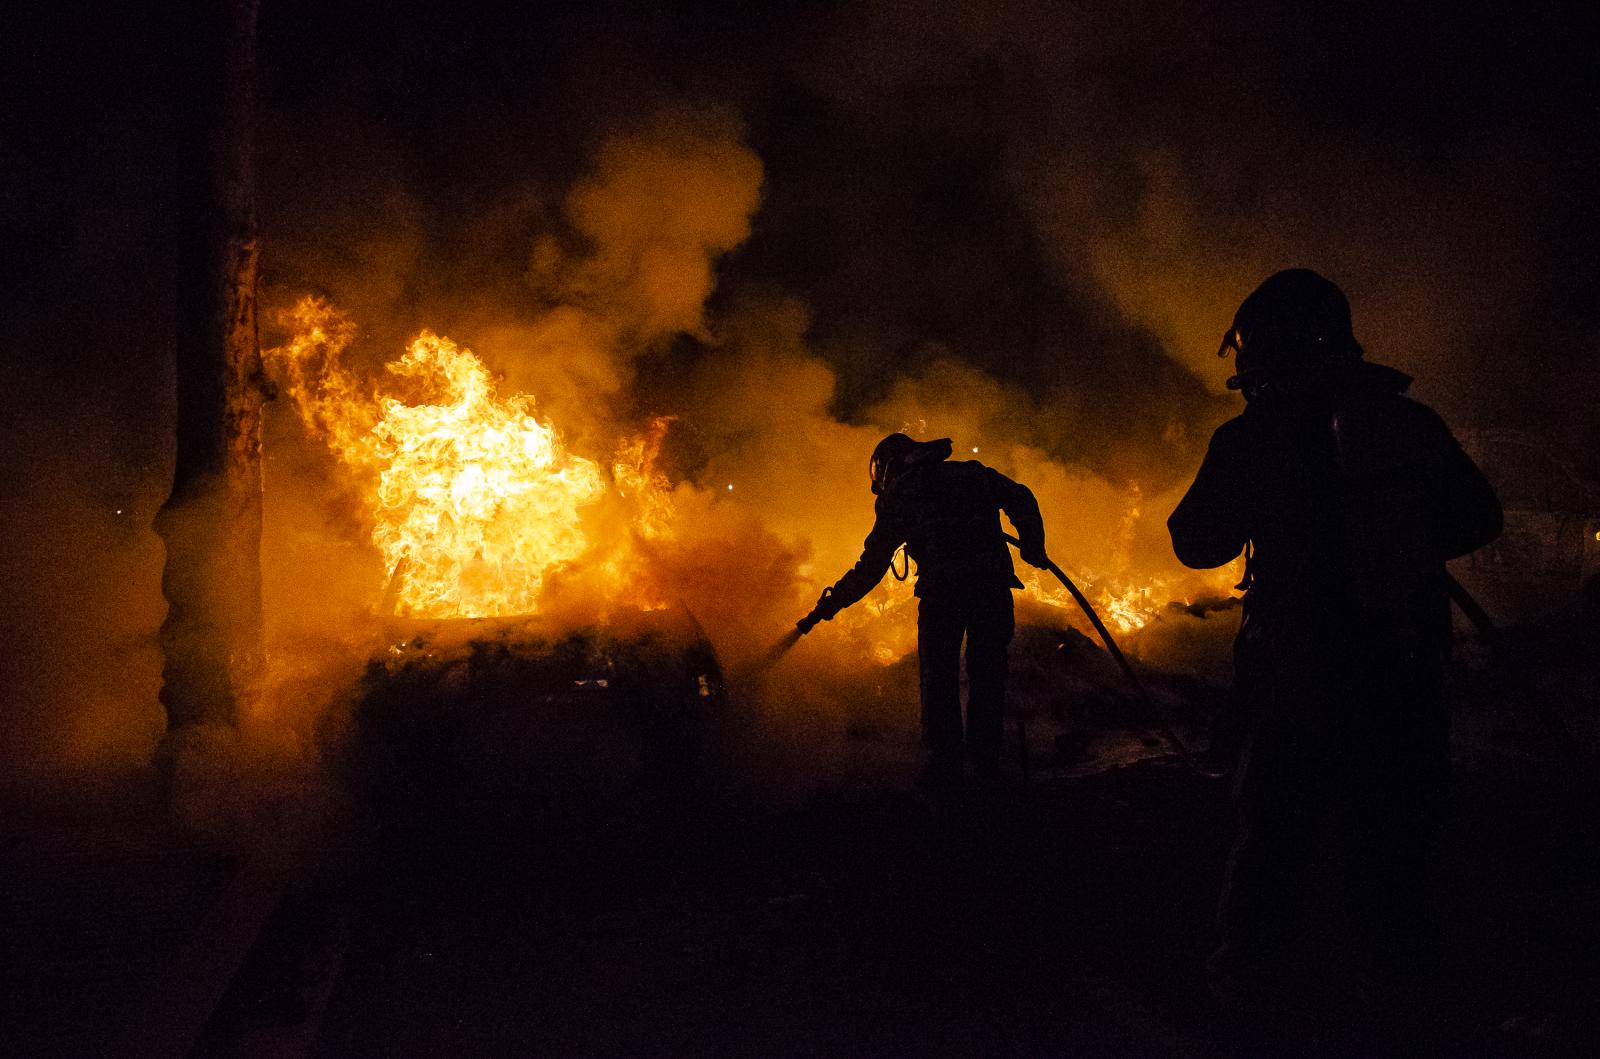 Image from DAILY NEWS - Firefighters work to extinguish several cars on fire due...